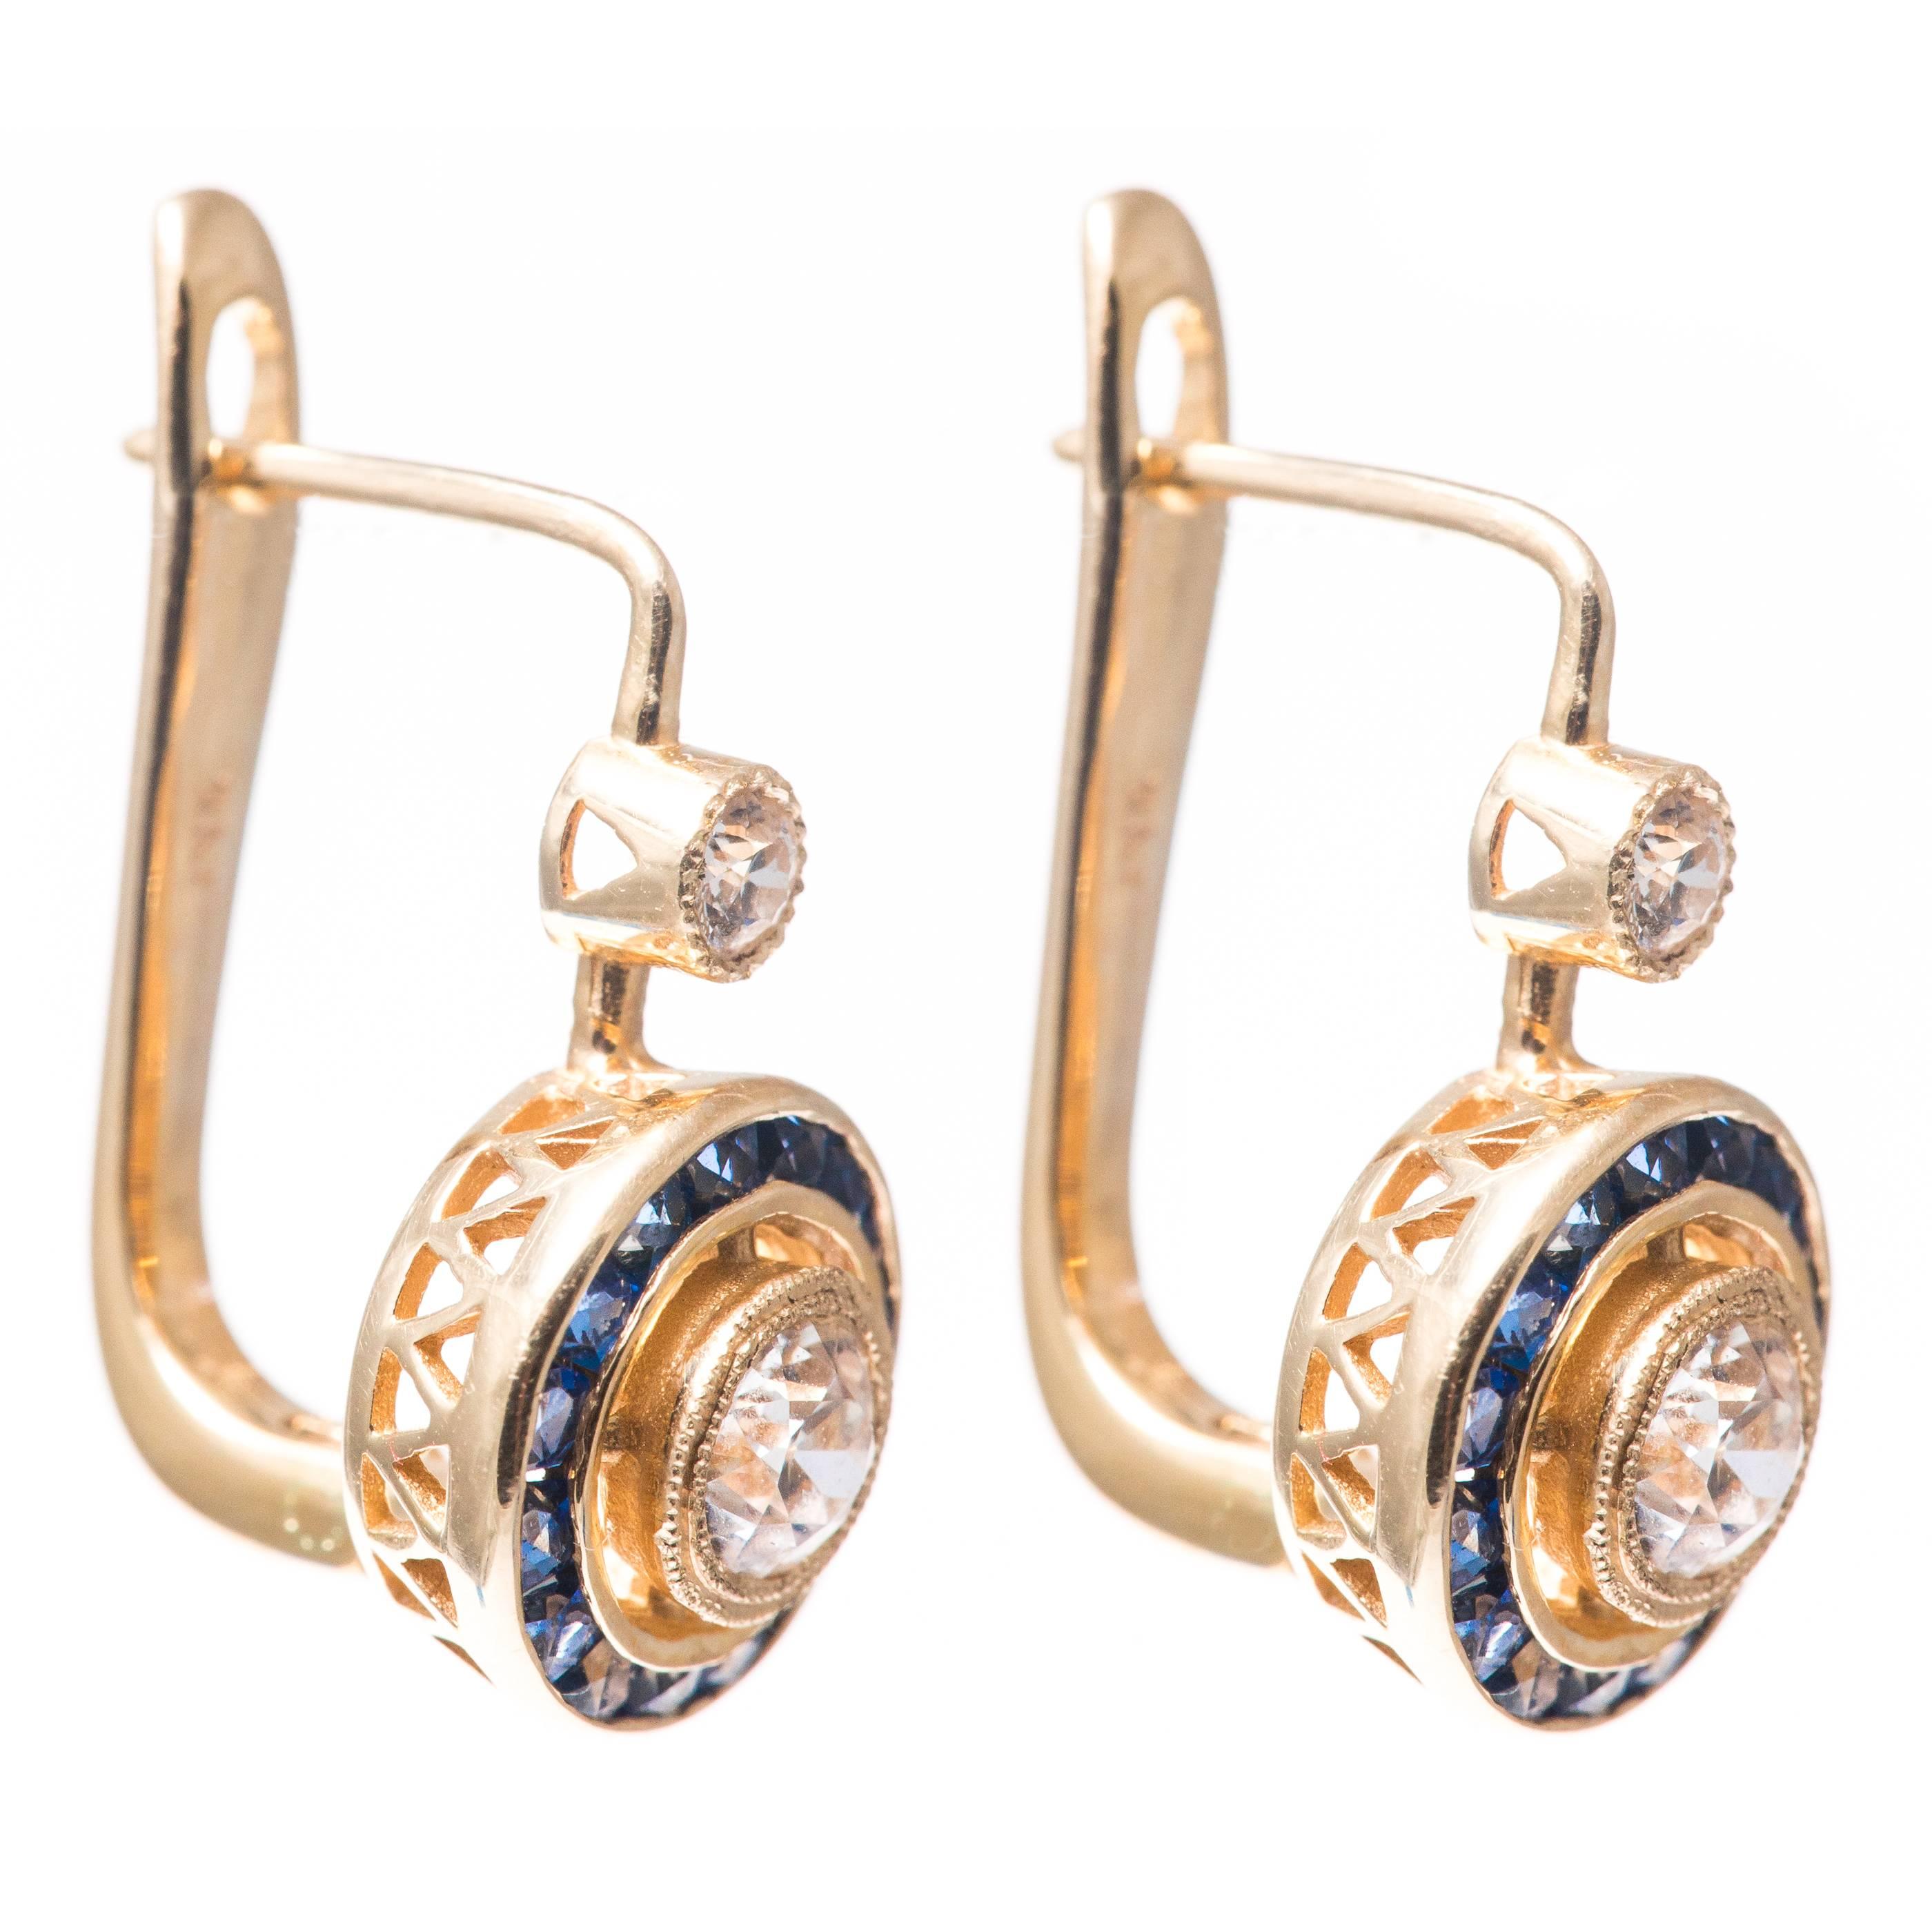 A pair of beautiful target style diamond and sapphire earrings in 14 karat yellow gold. Centered by a pair of old European cut diamonds these diamonds feature halos of French cut vivid blue sapphires surrounding the sparkling diamonds.  

Grading as